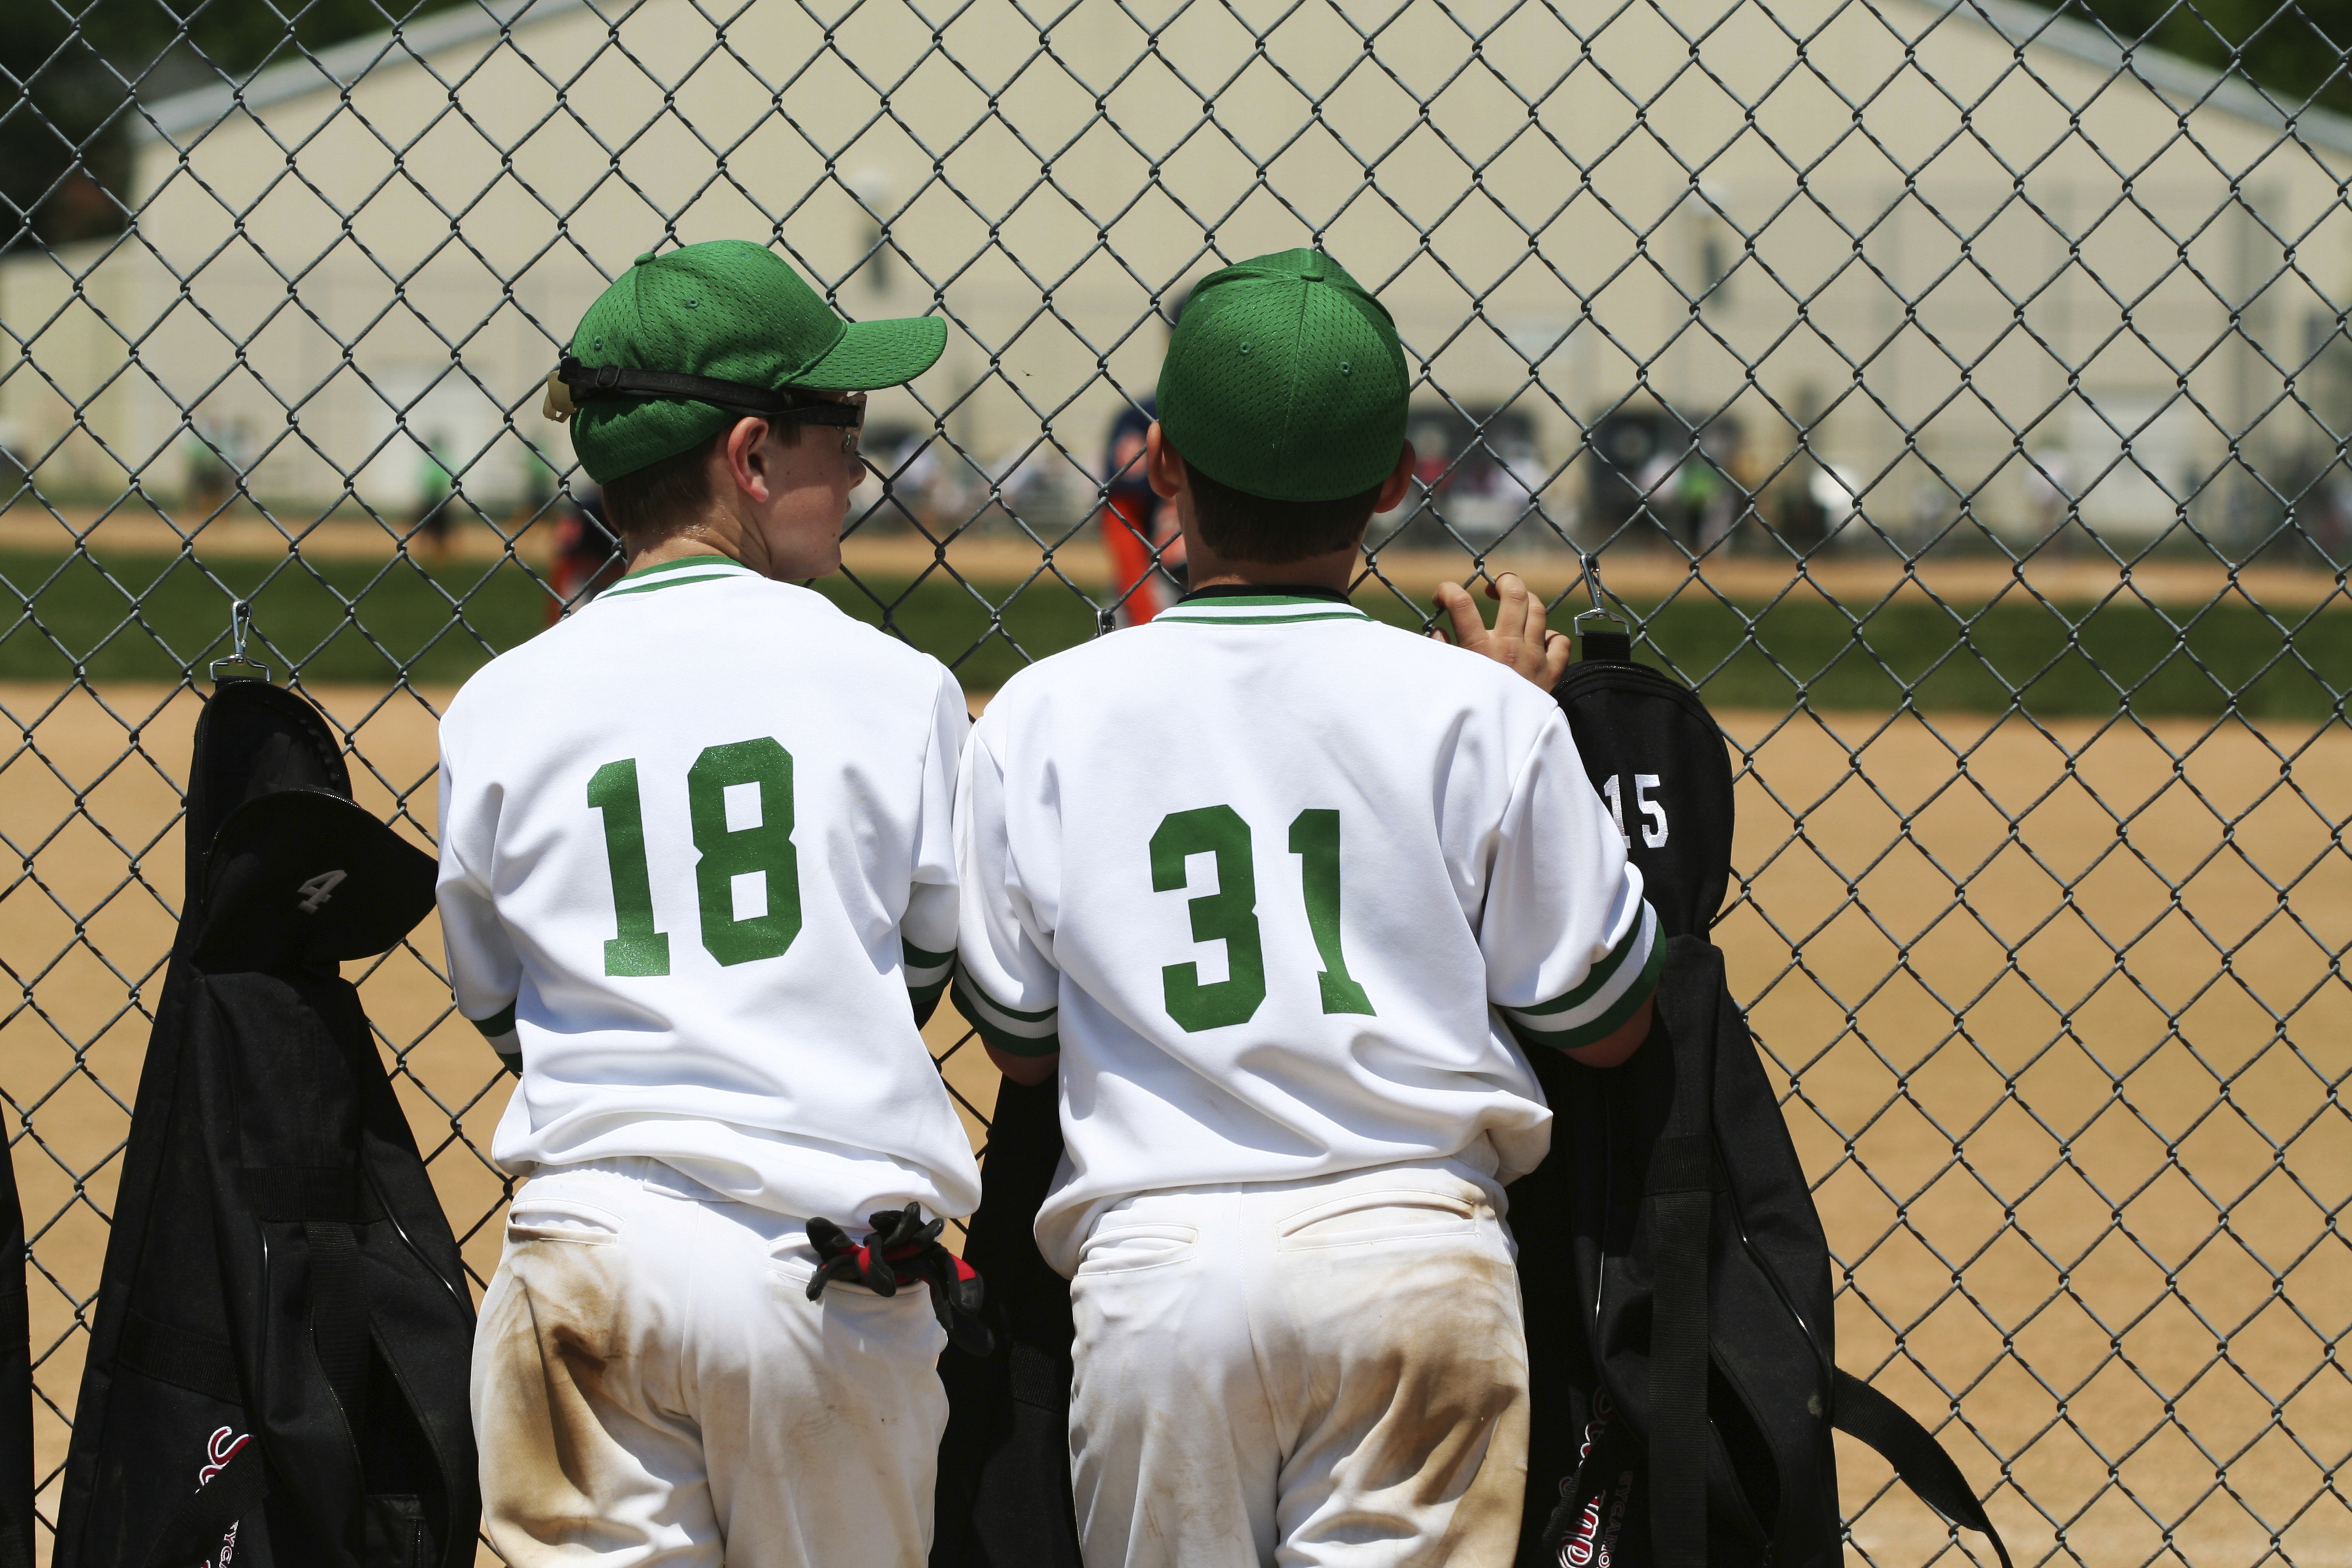 two boys in white and green baseball uniforms